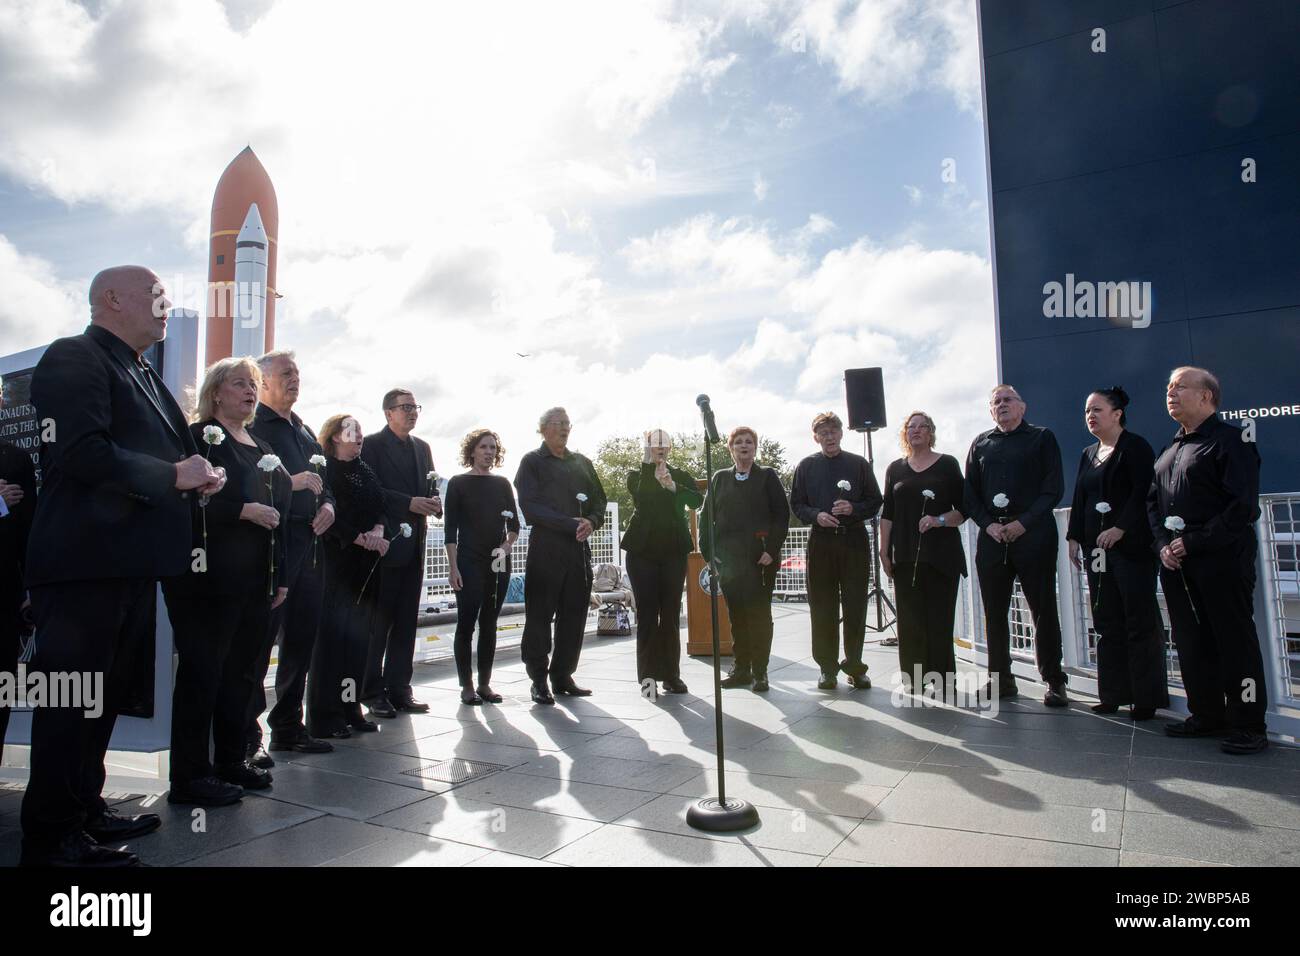 Members of the Space Coast Voices sing the National Anthem during the NASA Day of Remembrance ceremony at the Space Mirror Memorial in the Kennedy Space Center Visitor Complex on Jan. 30, 2020. The crews of Apollo 1 and space shuttles Challenger and Columbia, as well as other fallen astronauts who lost their lives in the name of space exploration and discovery, were honored at the annual event. Stock Photo